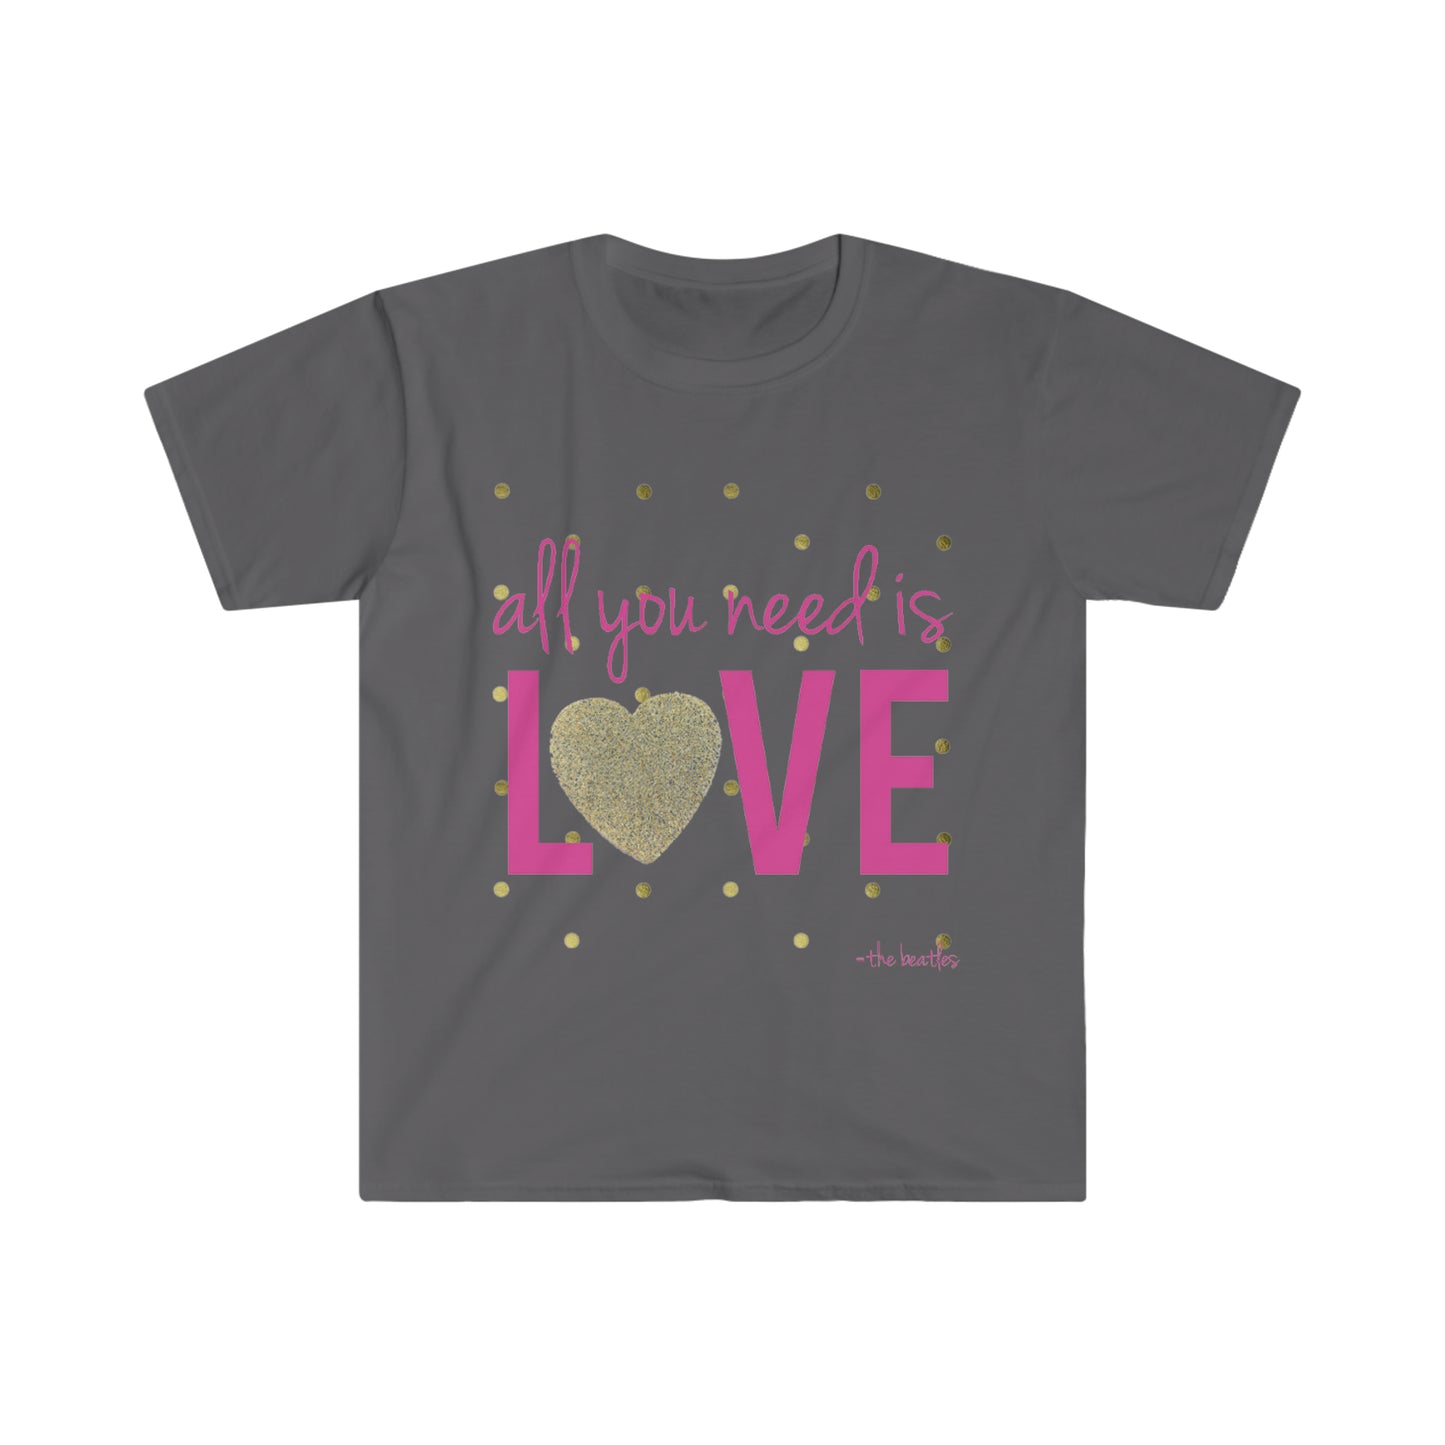 All you need is love - Unisex Softstyle T-Shirt